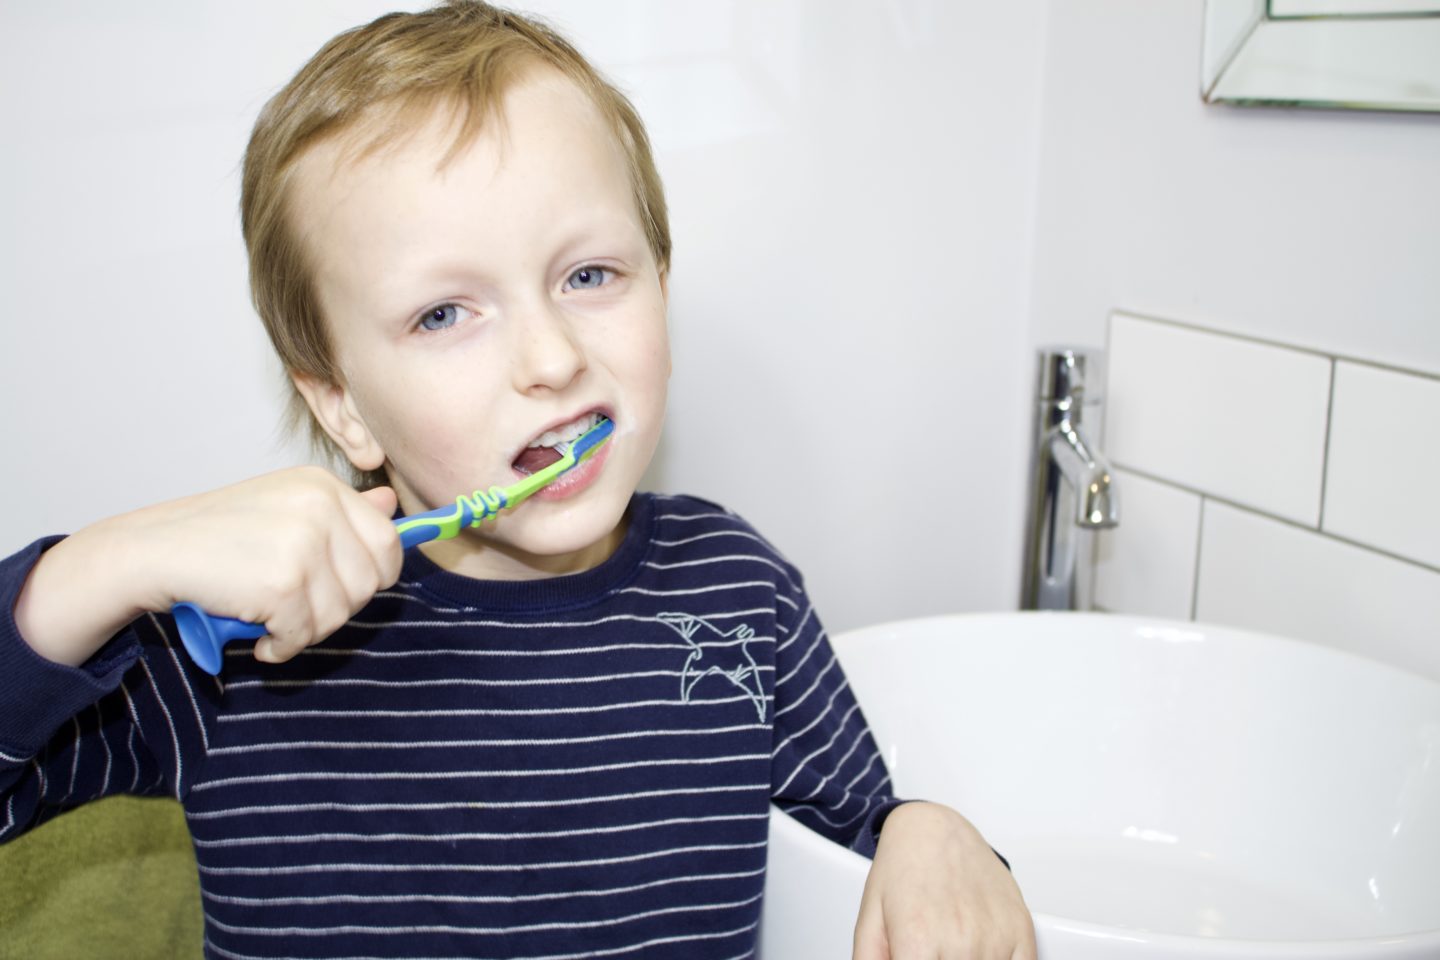 Blonde boy brushing his teeth with a green and blue brush